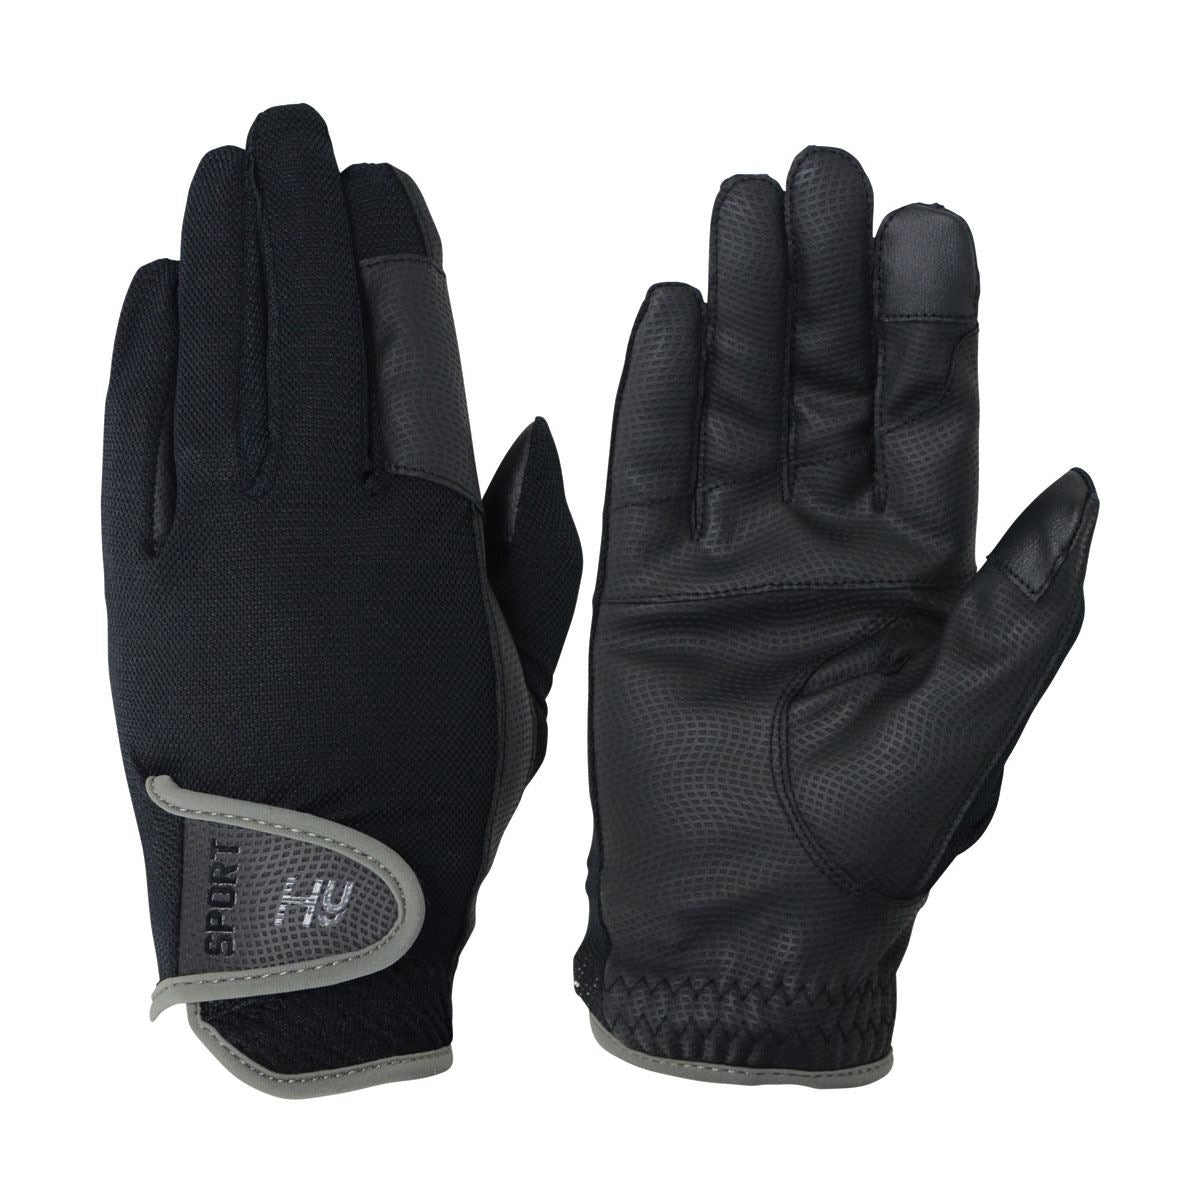 Hy5 Sport Dynamic Lightweight Riding Gloves - Just Horse Riders